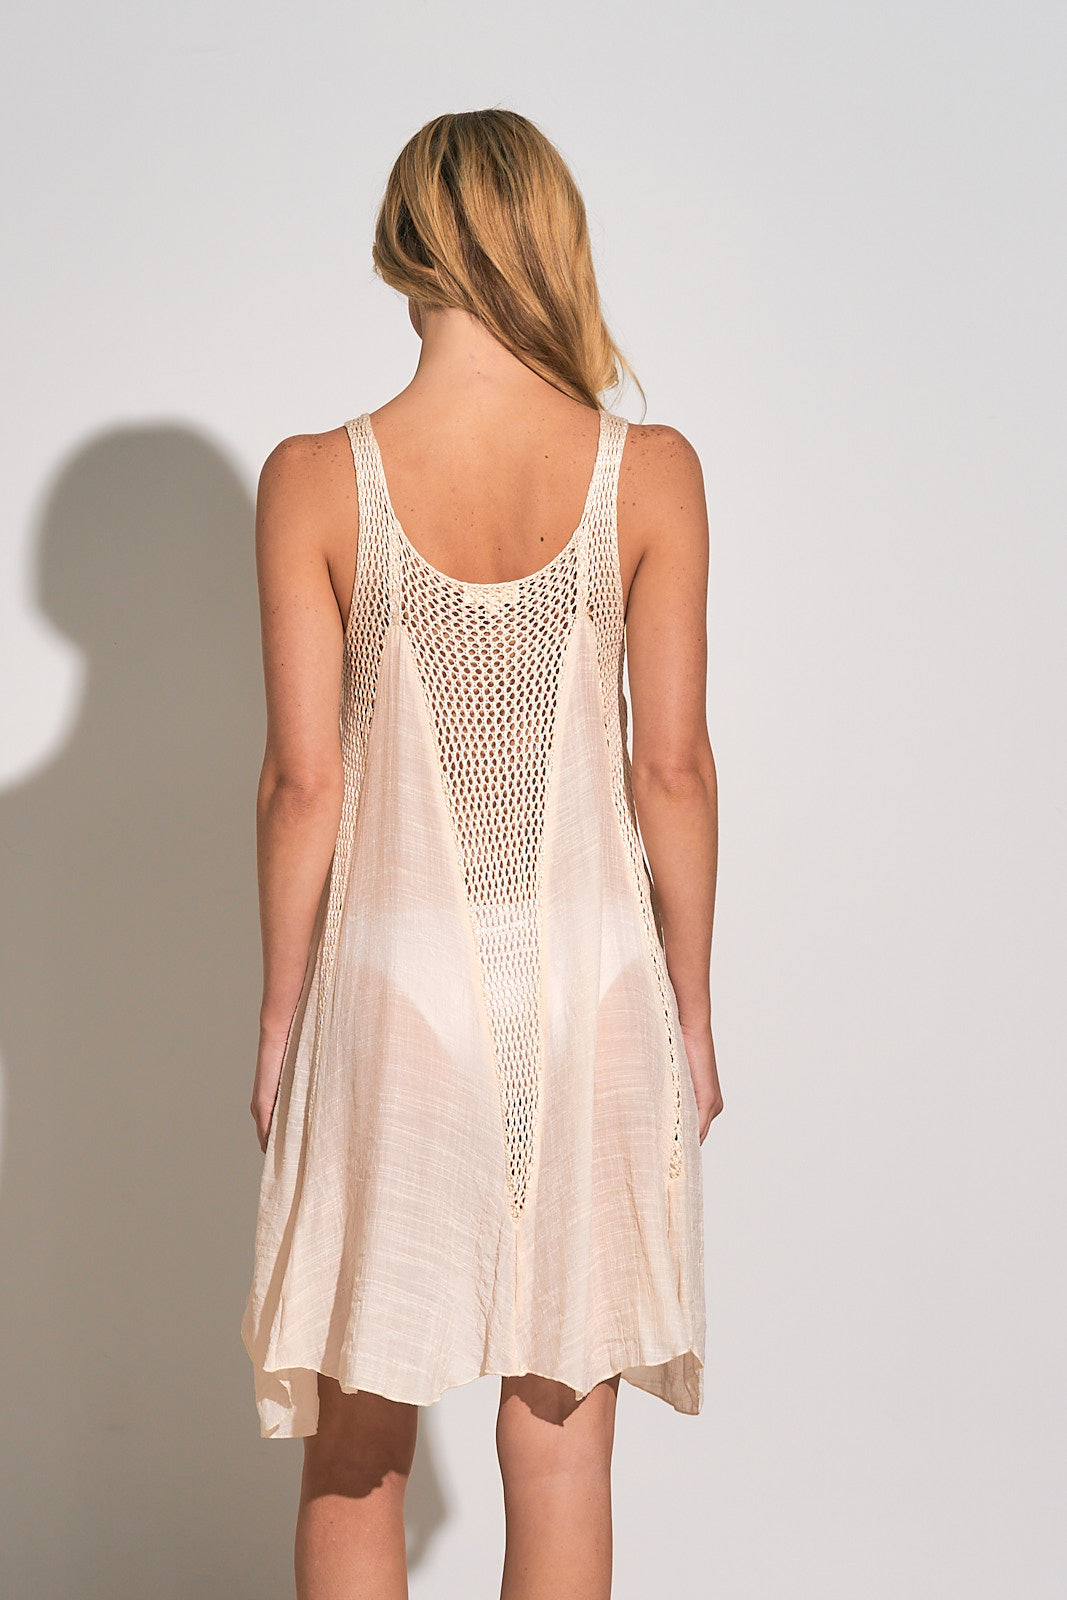 The Crochet Tank Cover Up Dress